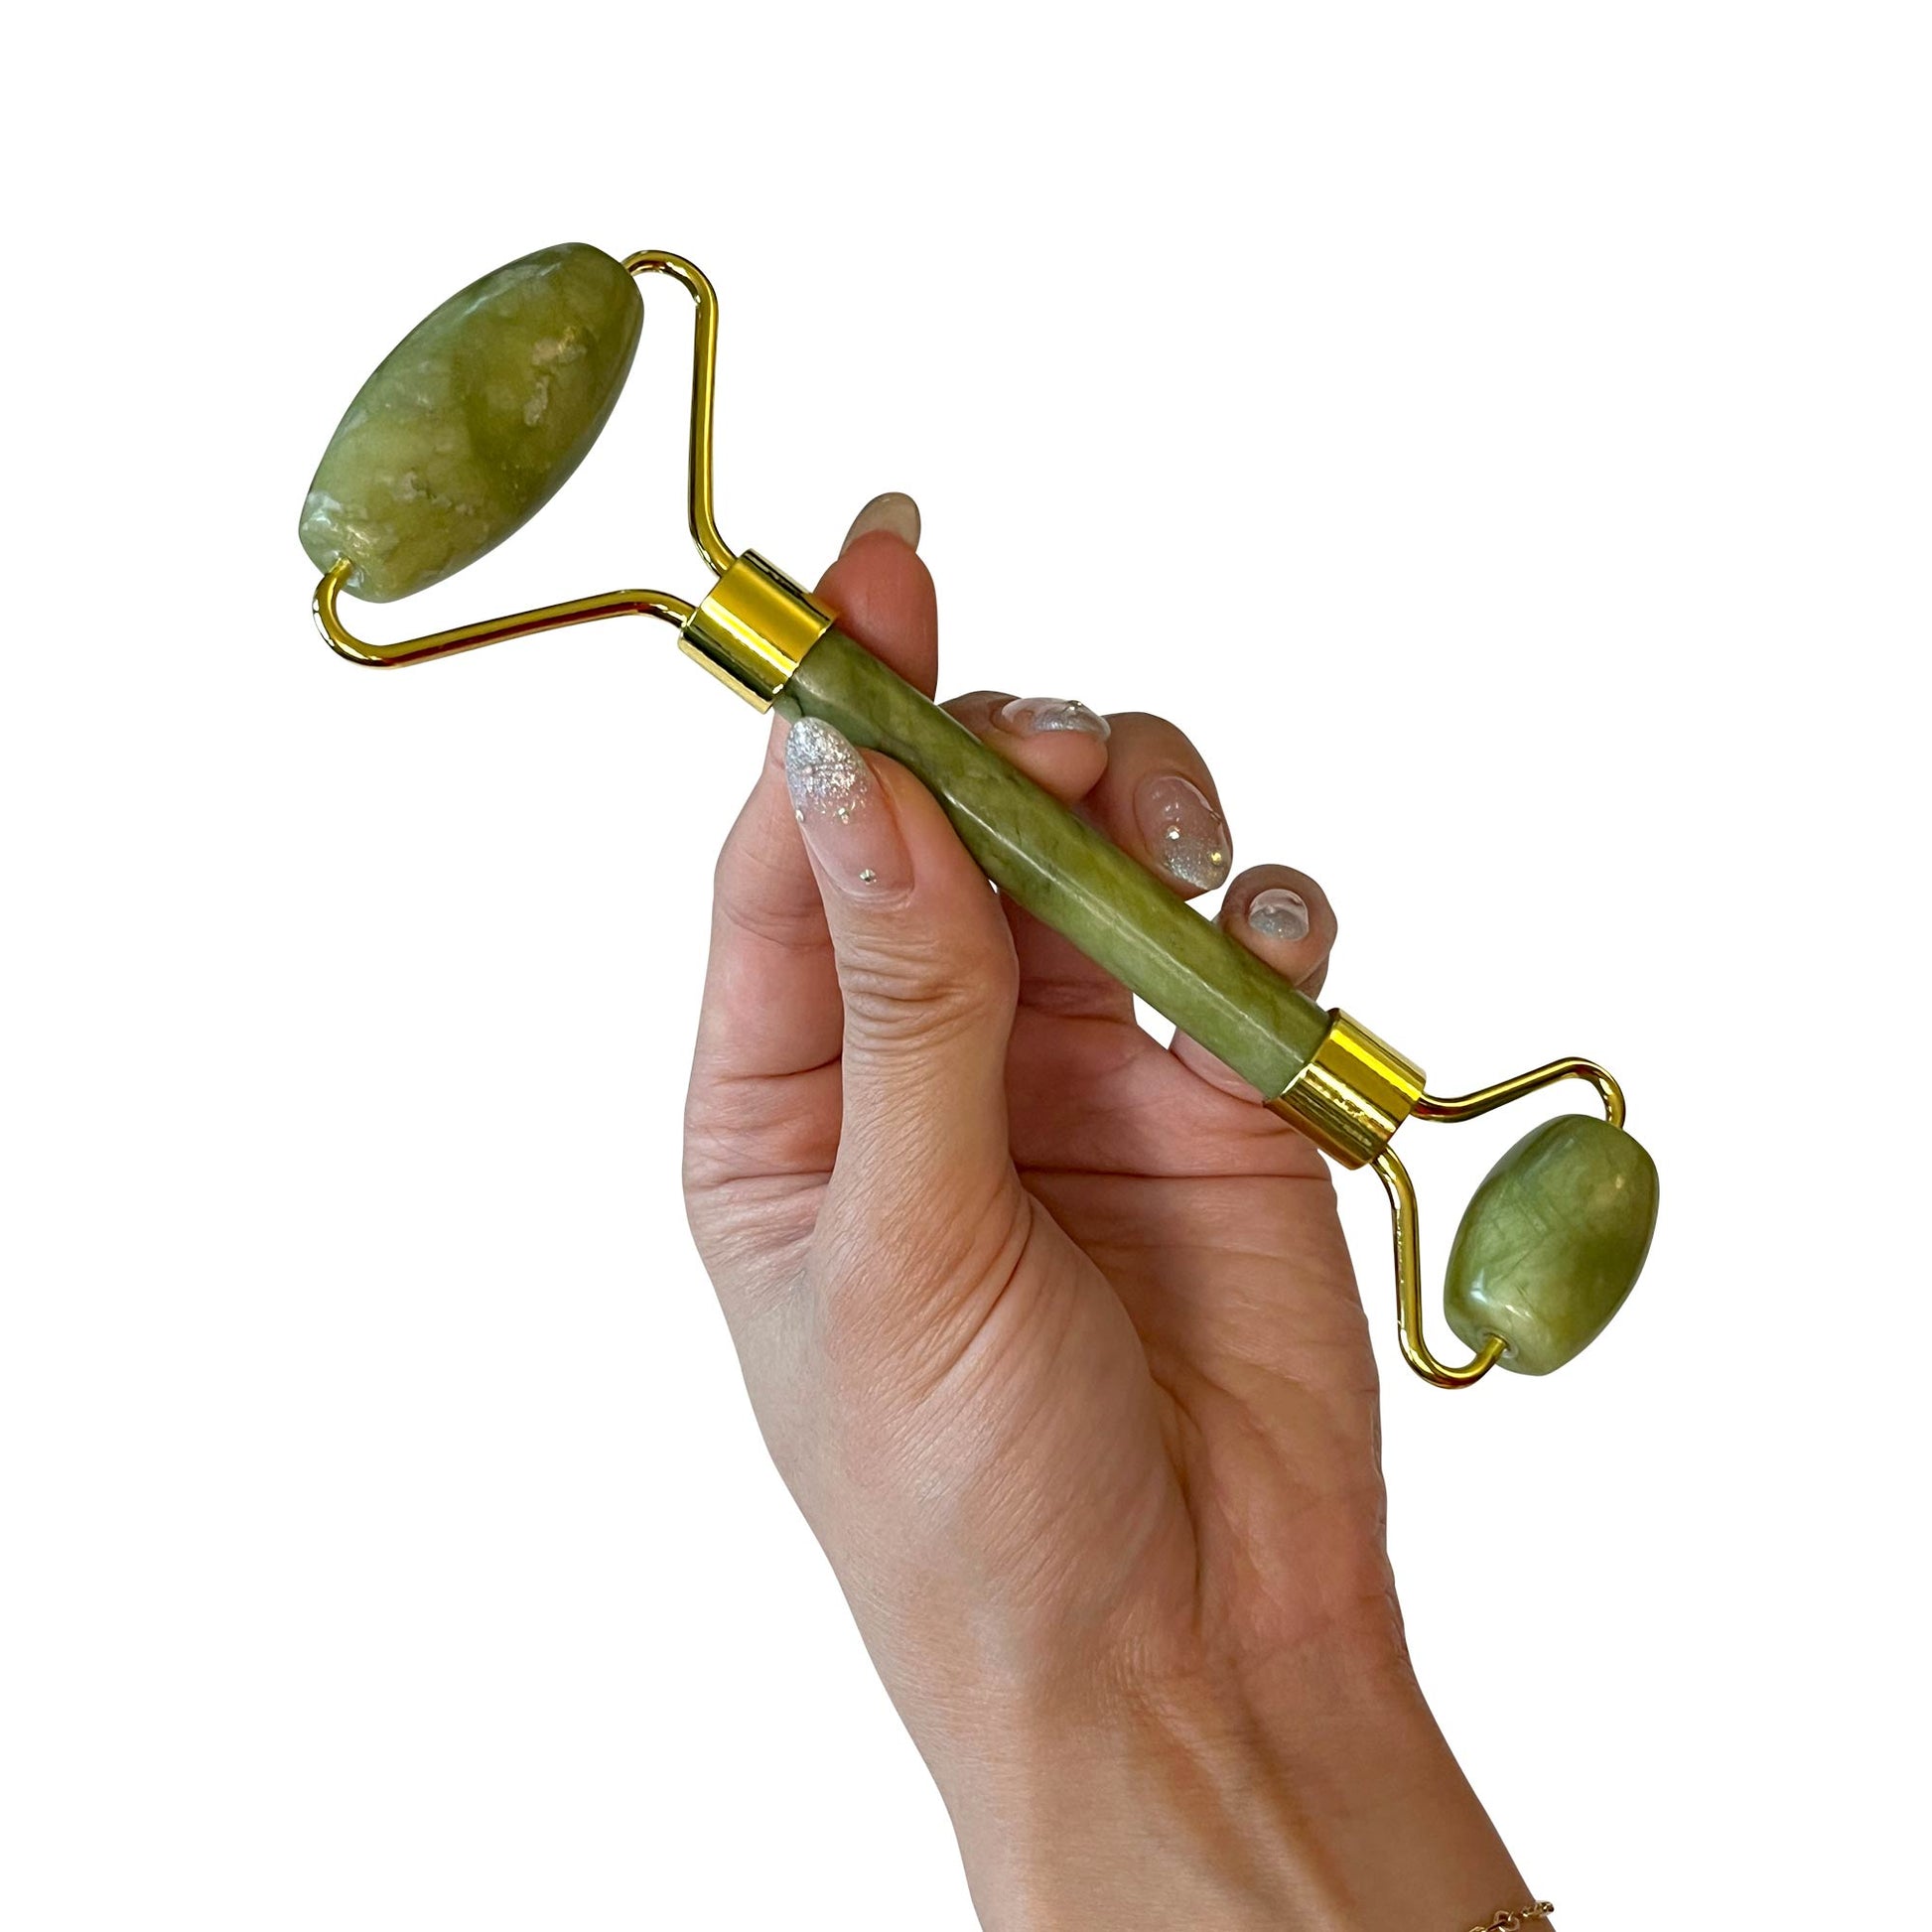 A hand holding a green jade roller, a stone massager used for relaxation and skincare.